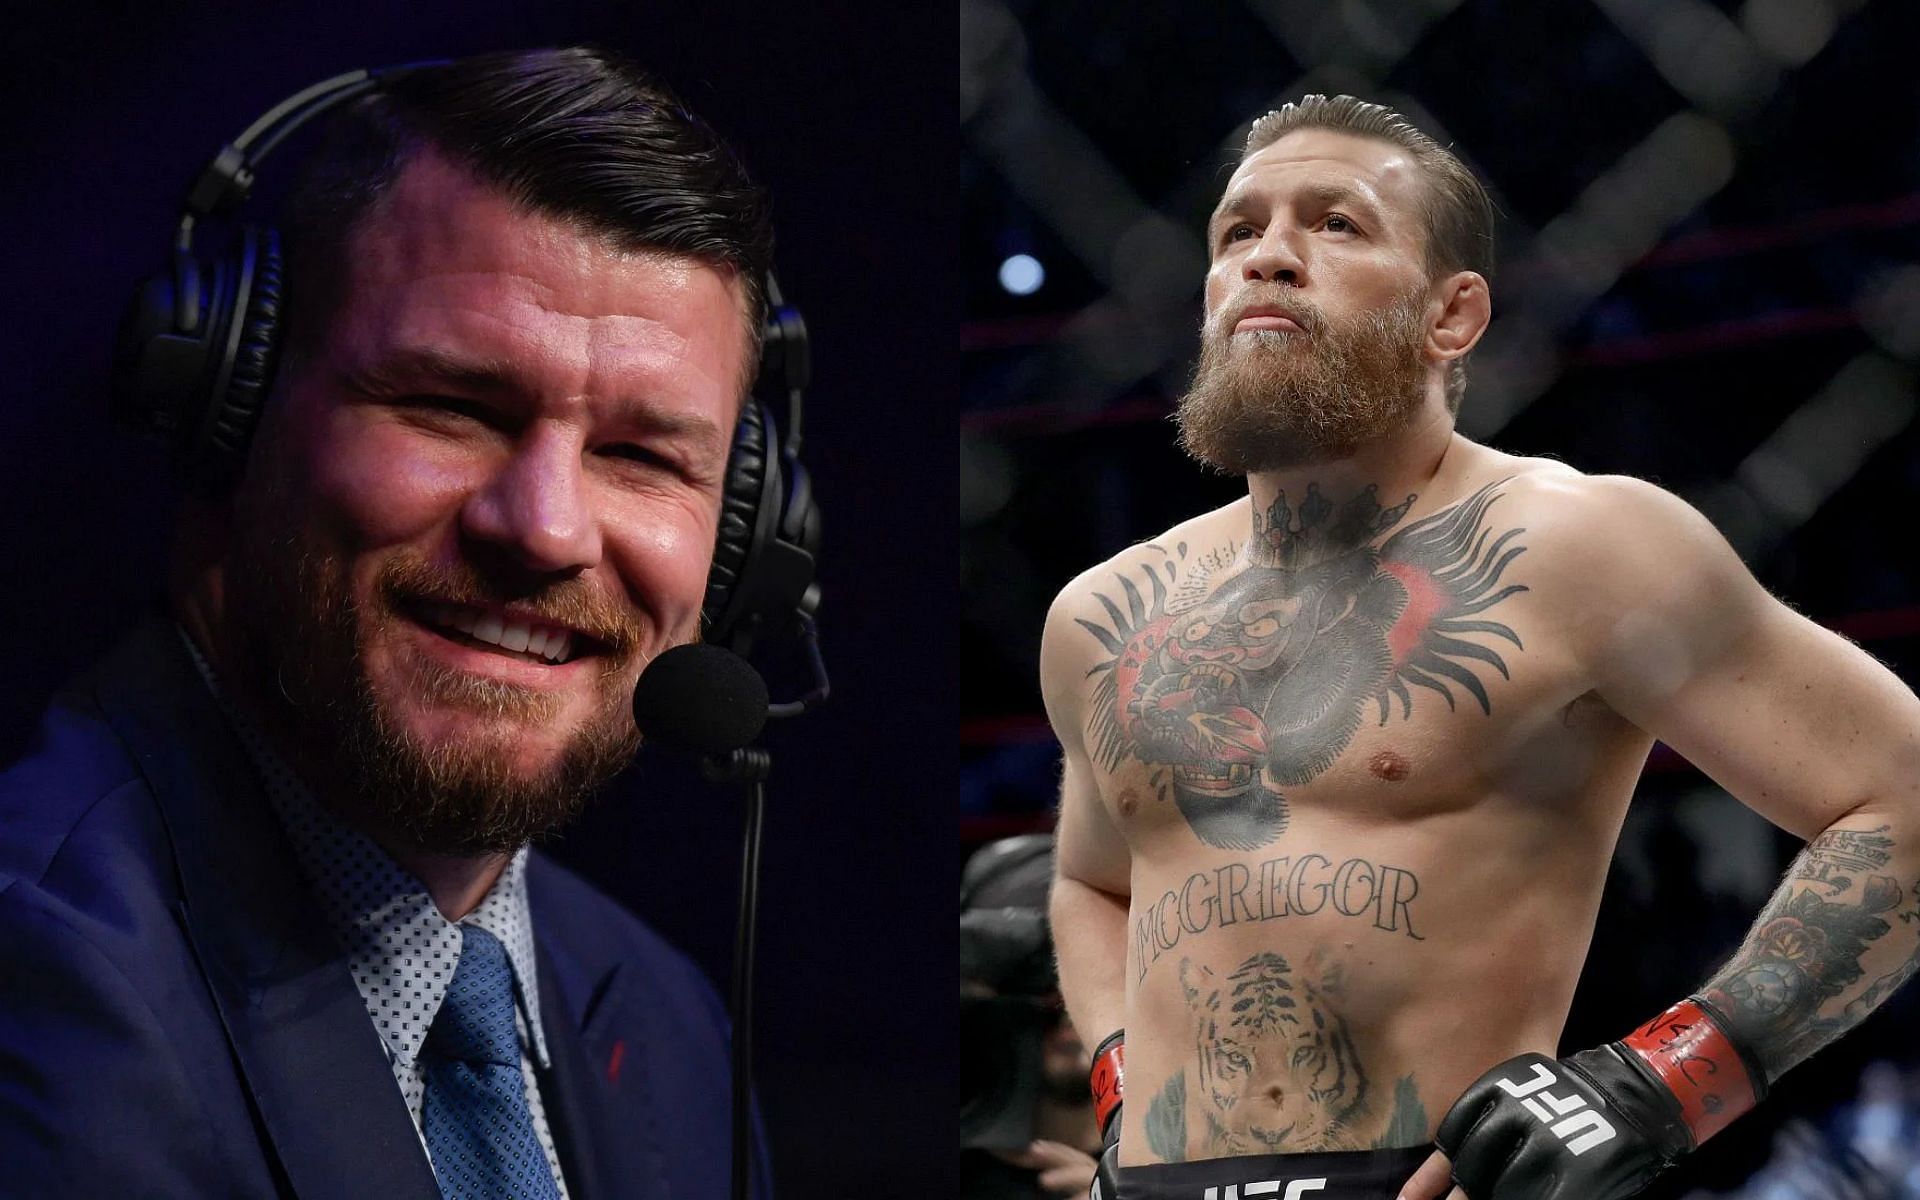 Michael Bisping (left) and Conor McGregor (right)